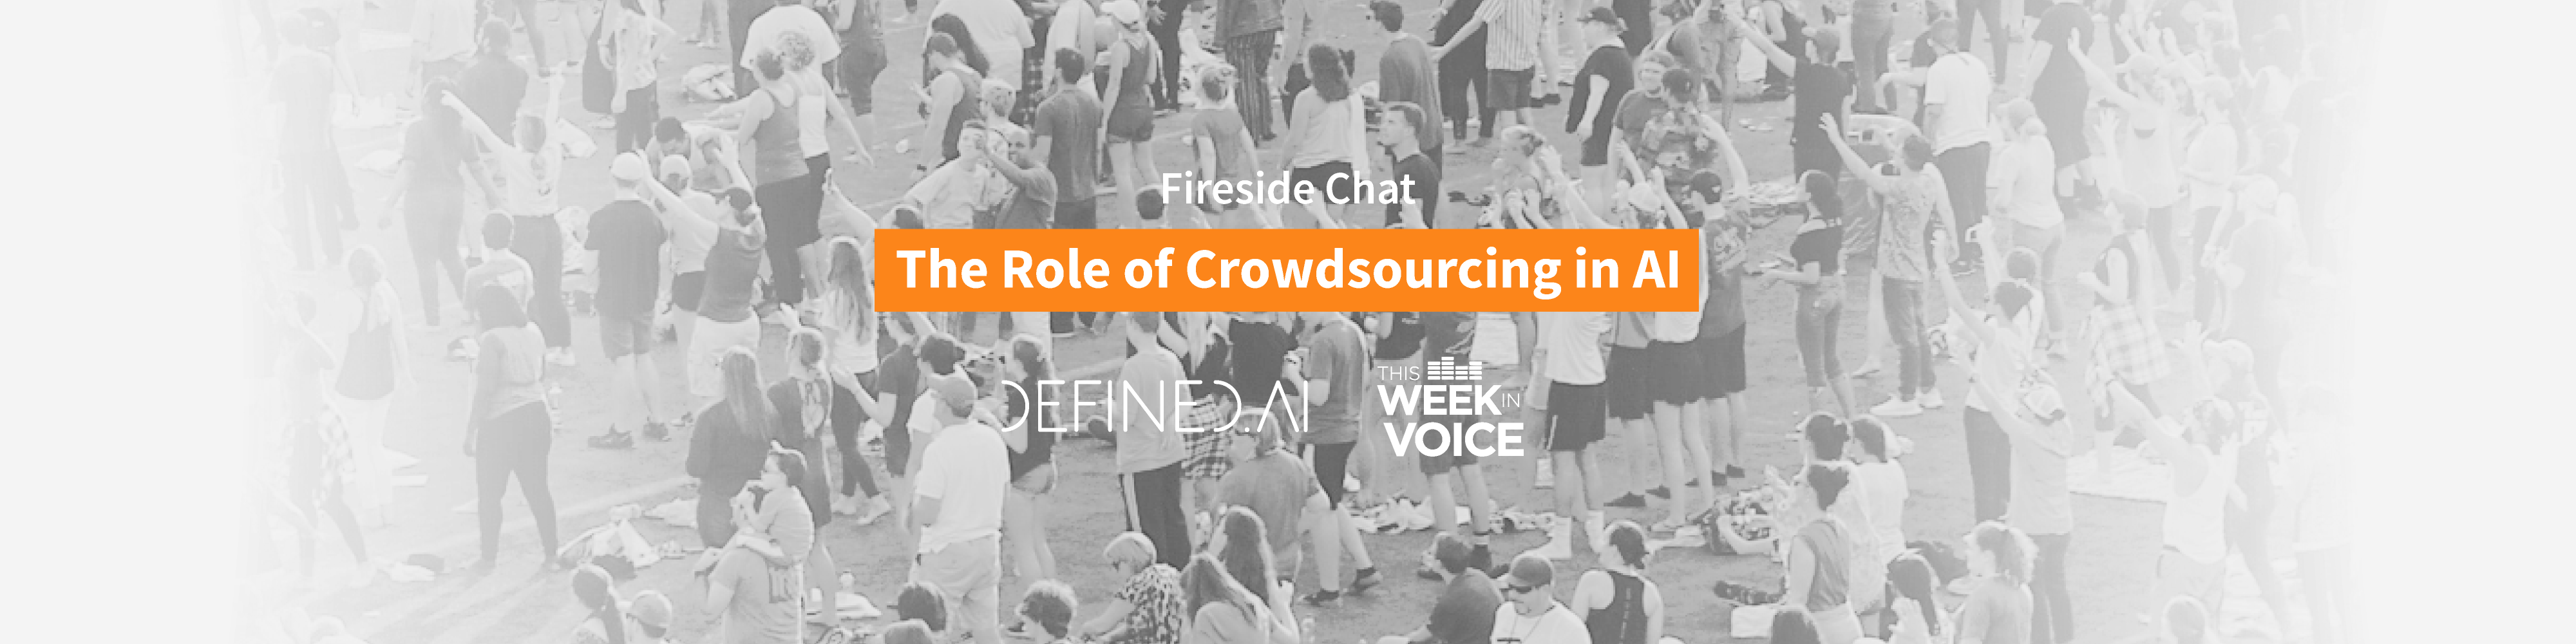 The Role of Crowdsourcing in AI